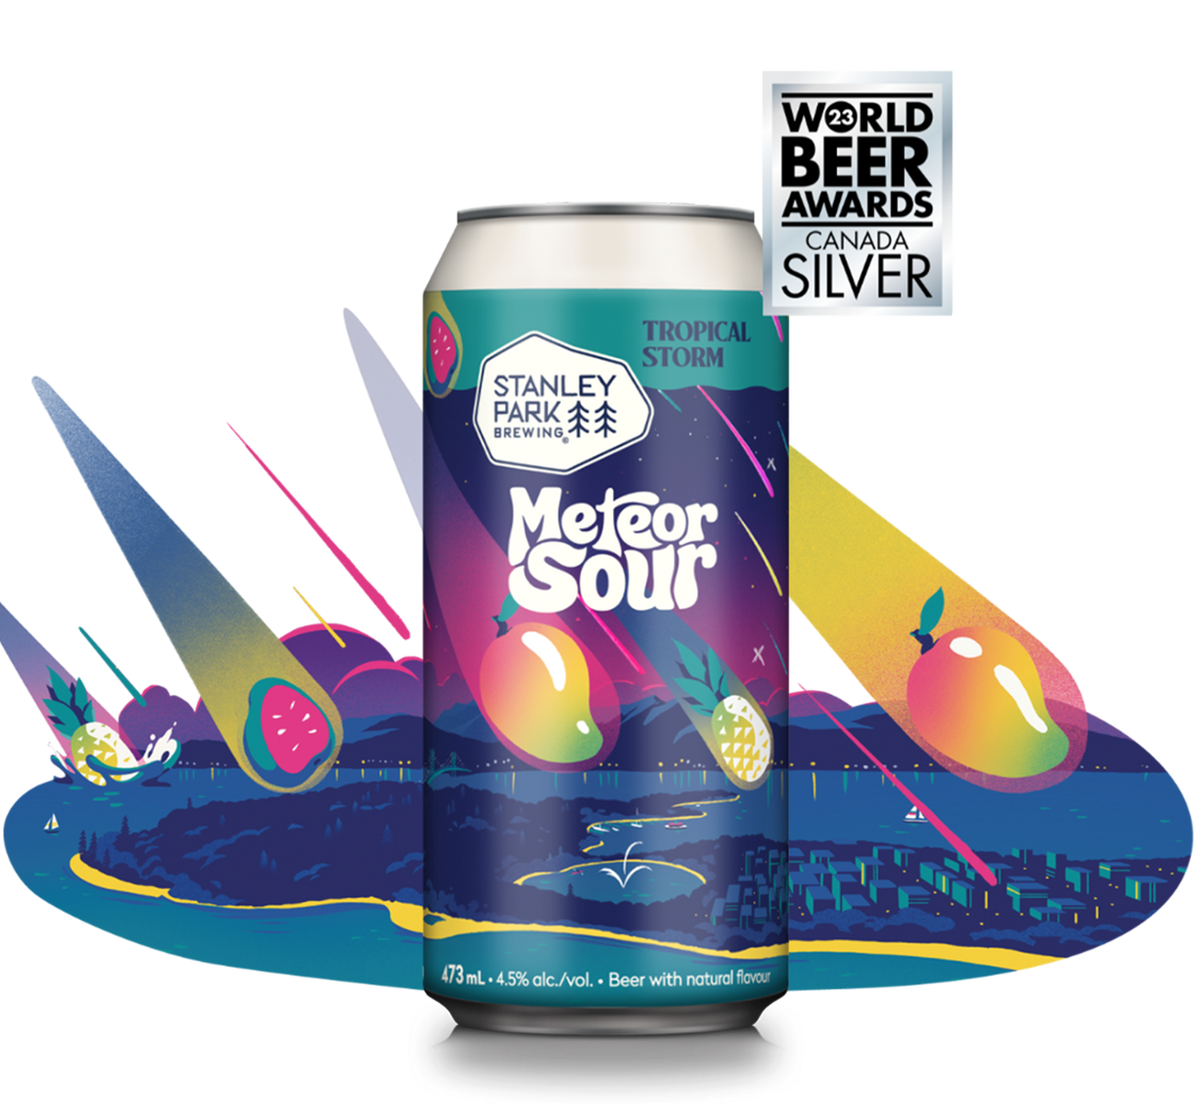 Meteor Sour Tropical Storm 473ml Single Tall Can